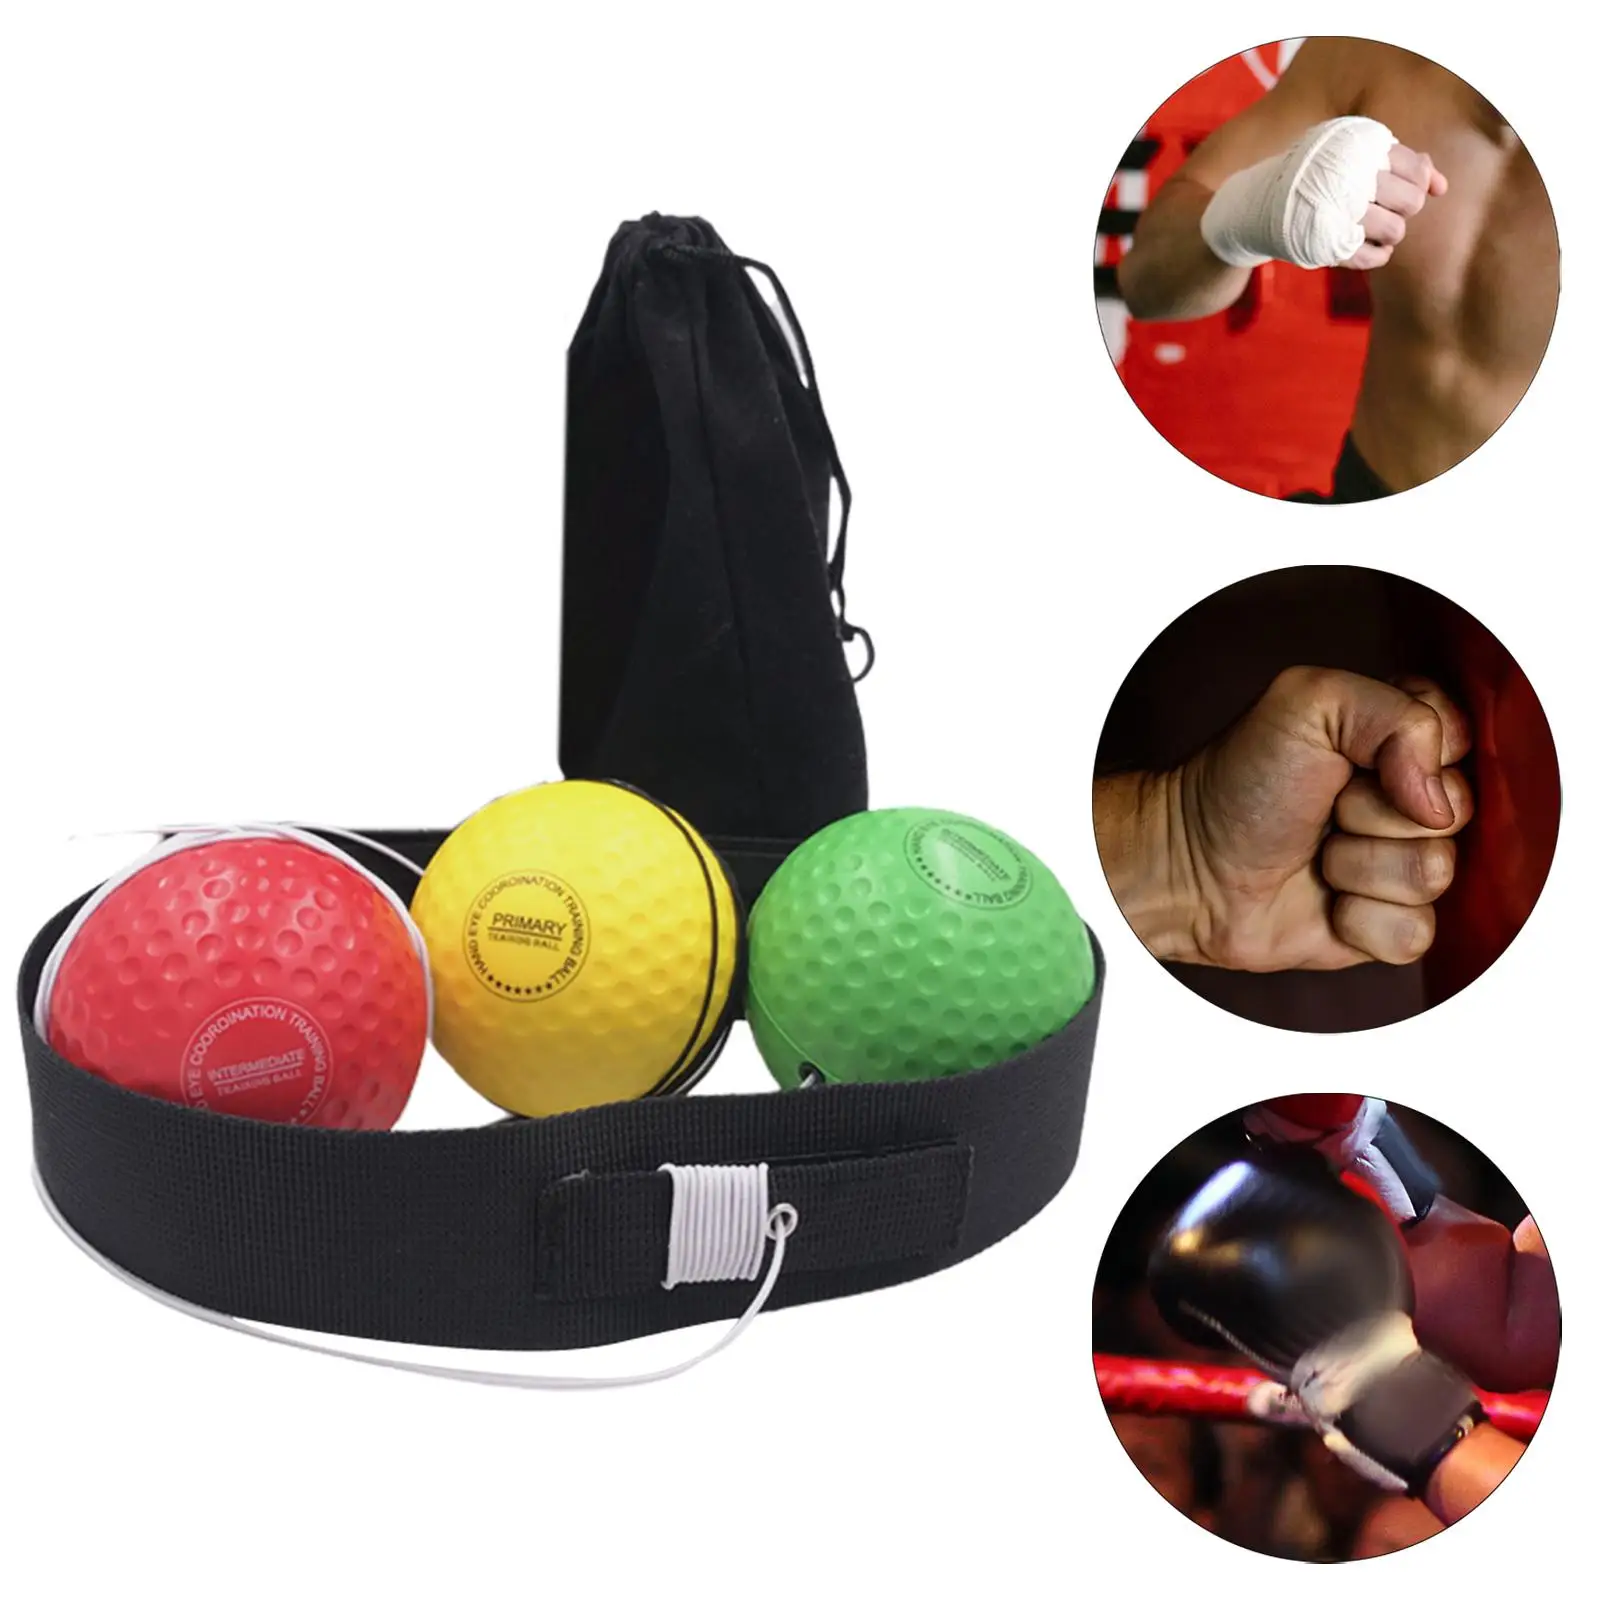 Boxing Reflex Ball Headband Set with Storage Bag Punching Speed Adjustable Headband for Home Gym Fitness Exercise Women Men